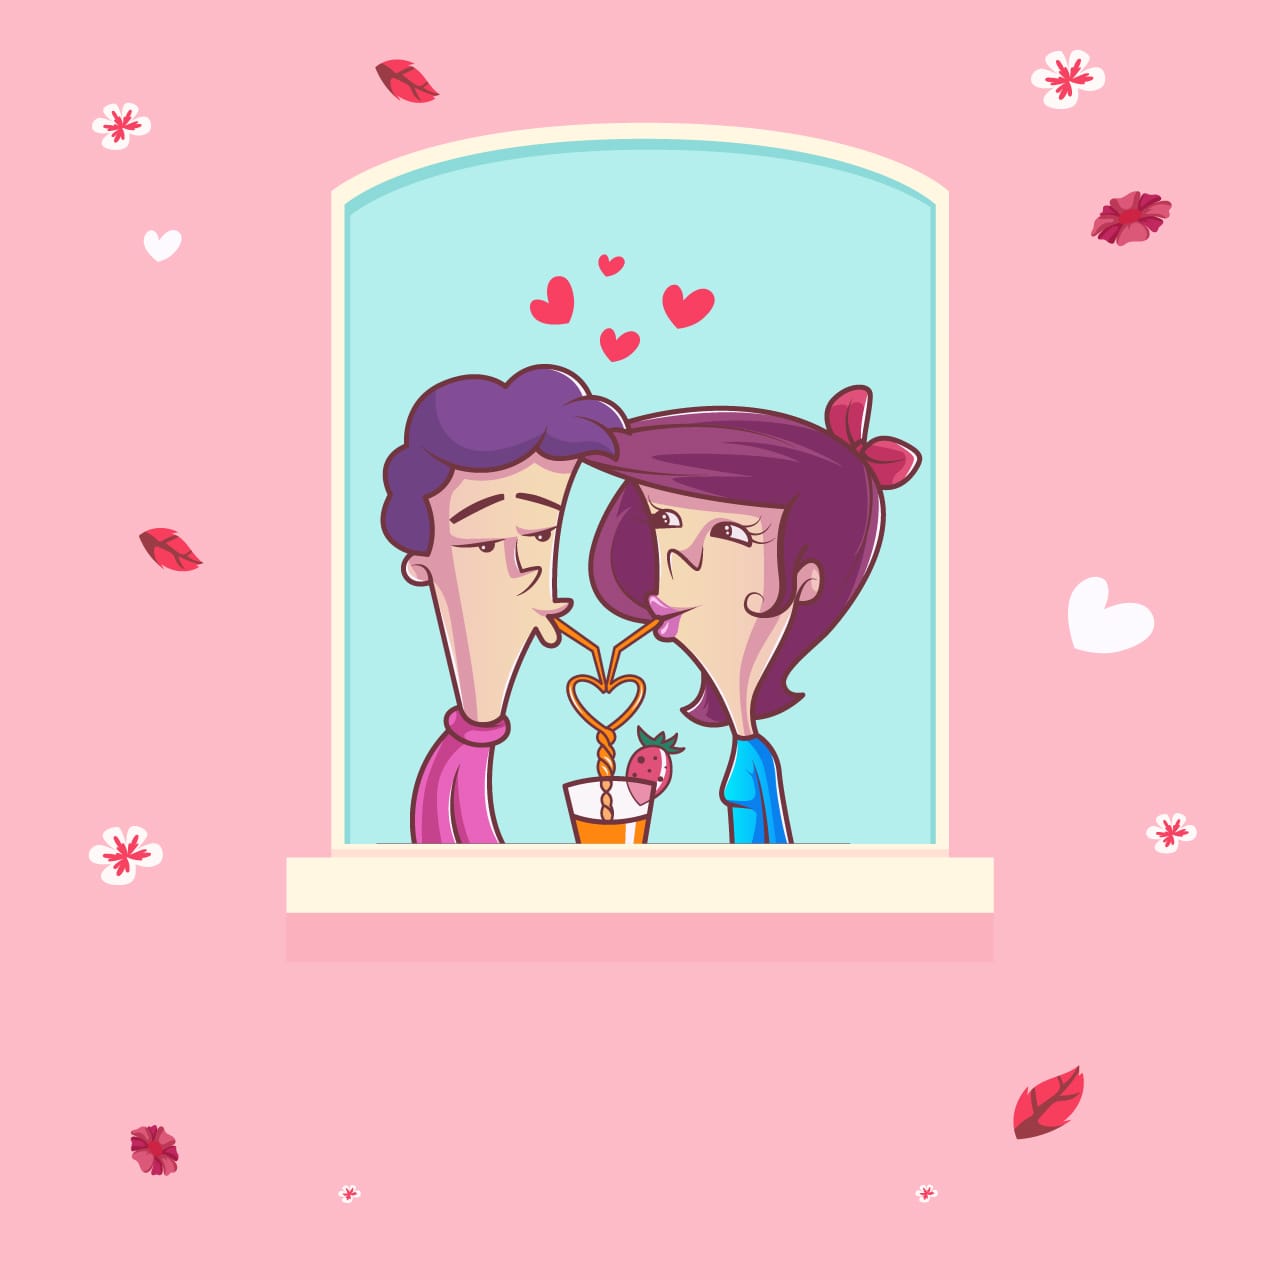 Couple clipart beautiful happy valentines day banner design cartoon image